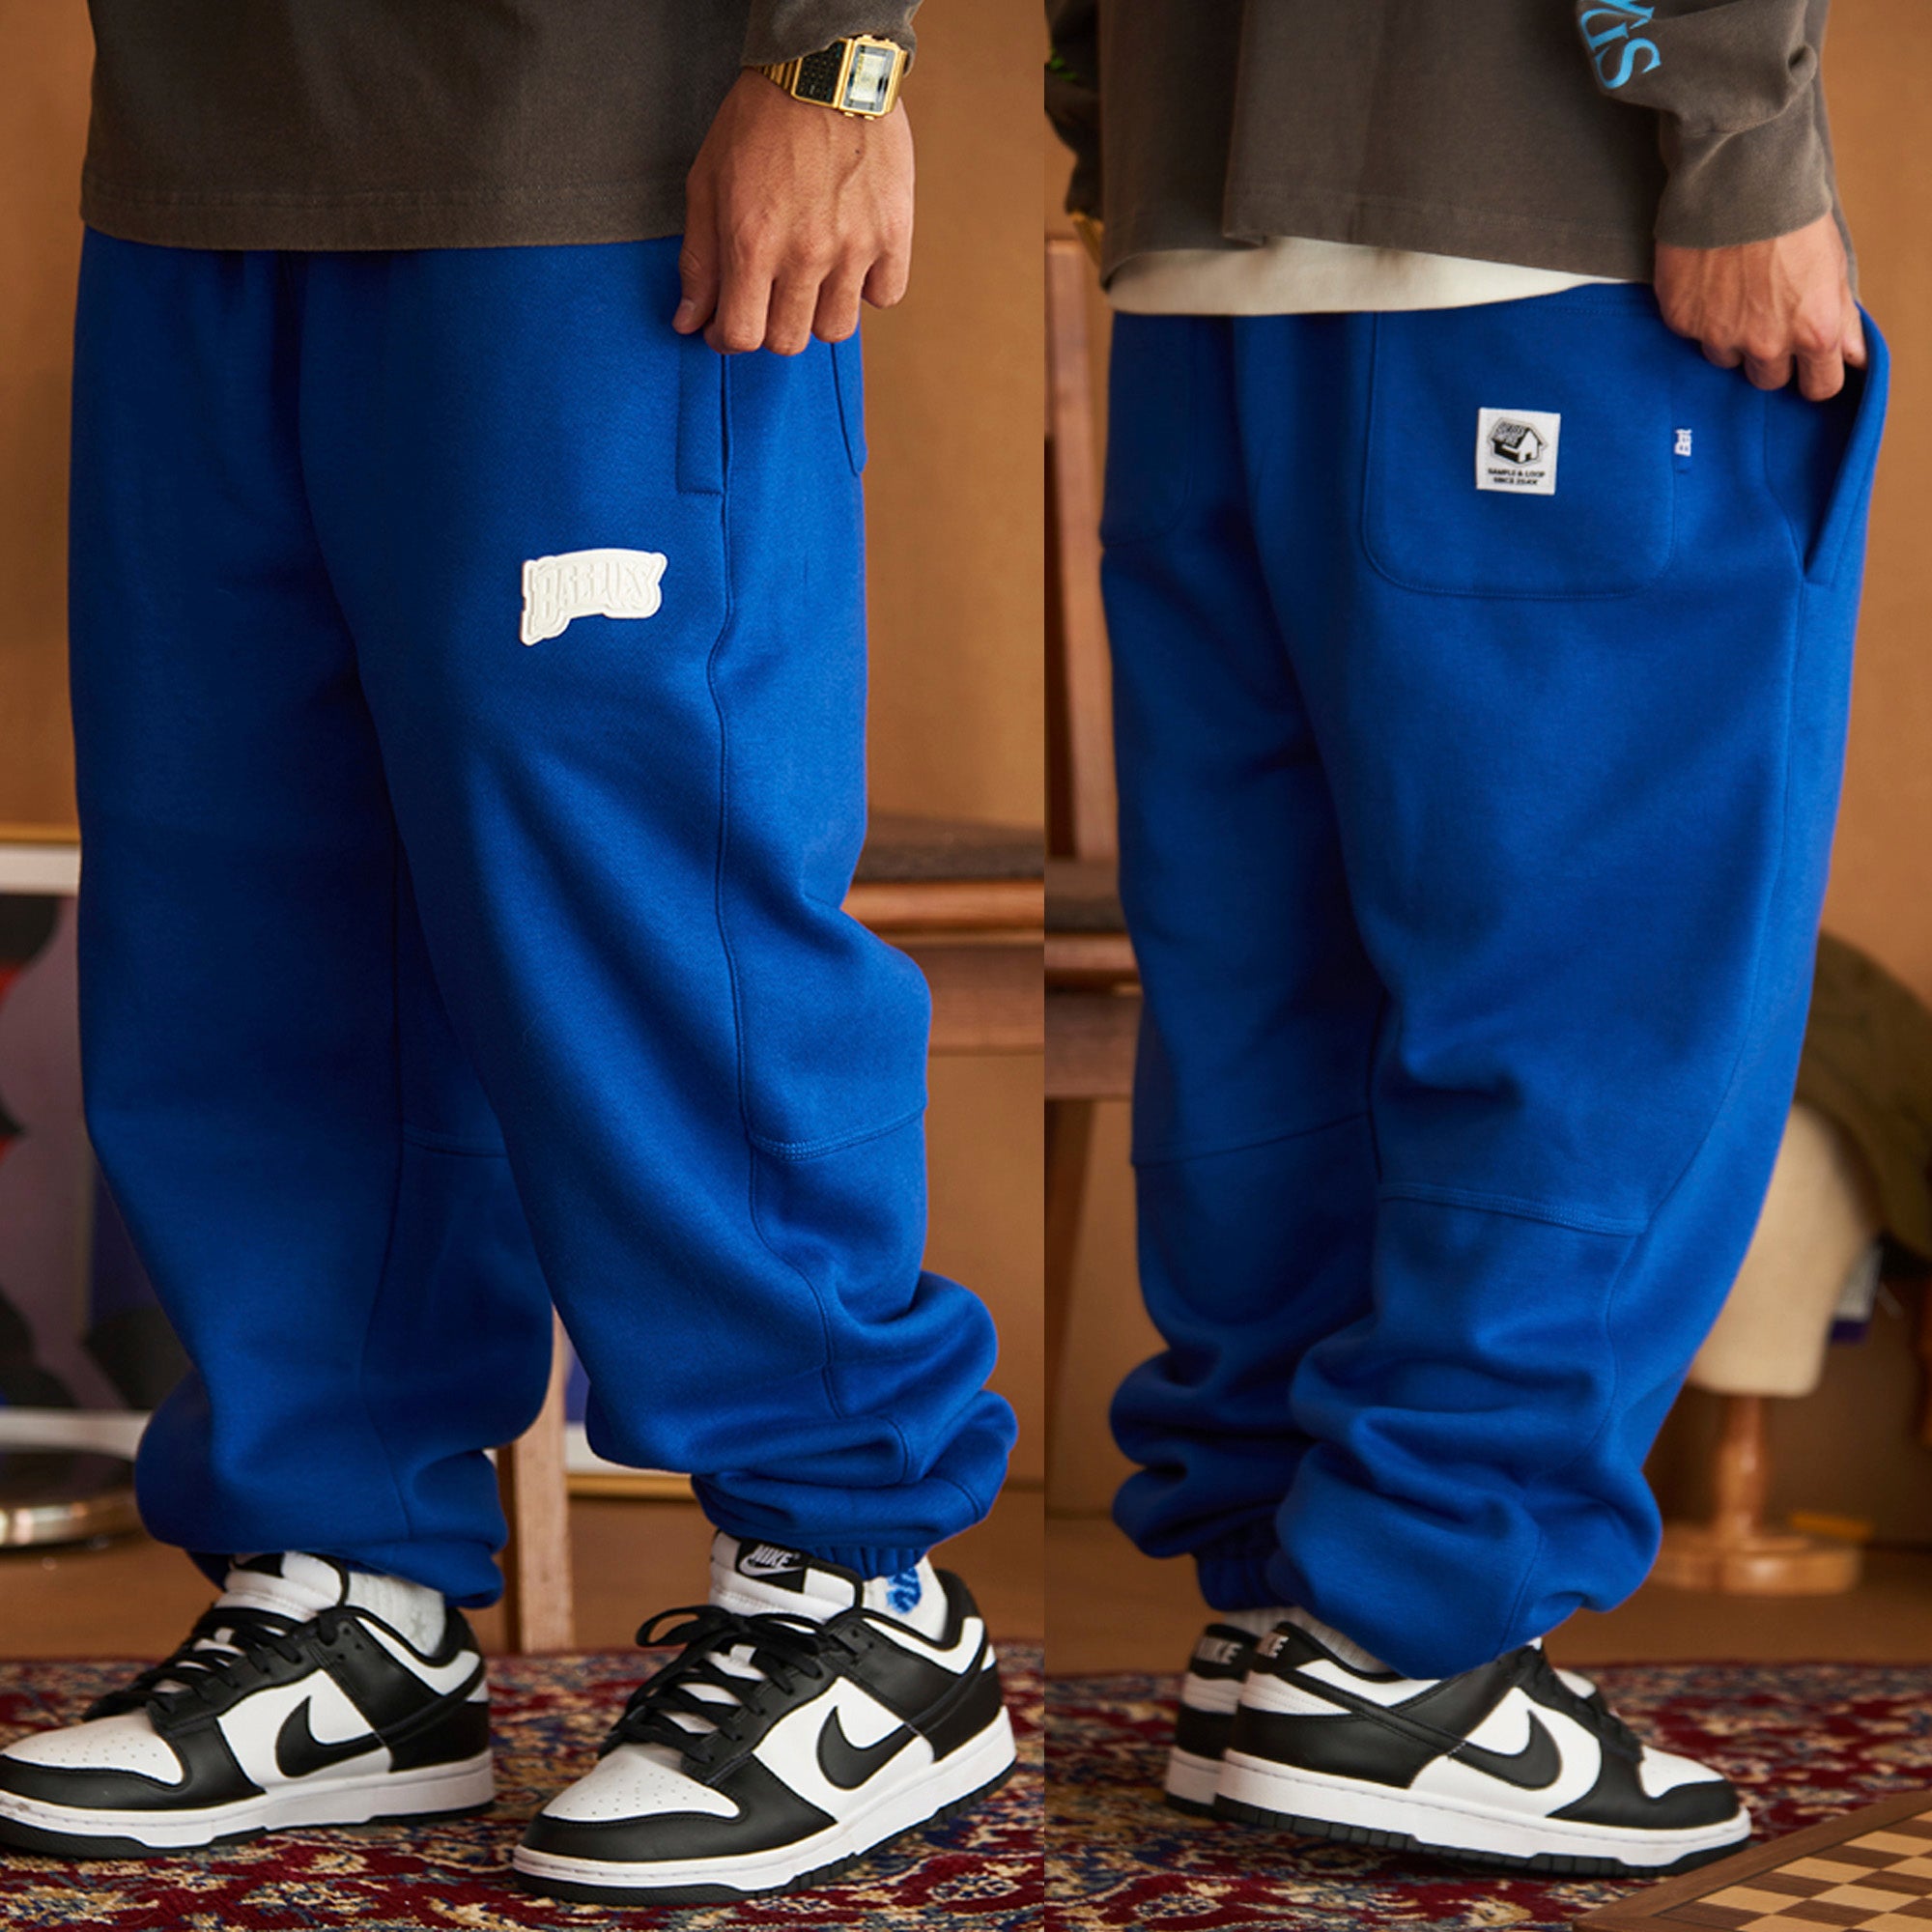 Rubber padded casual sweatpants